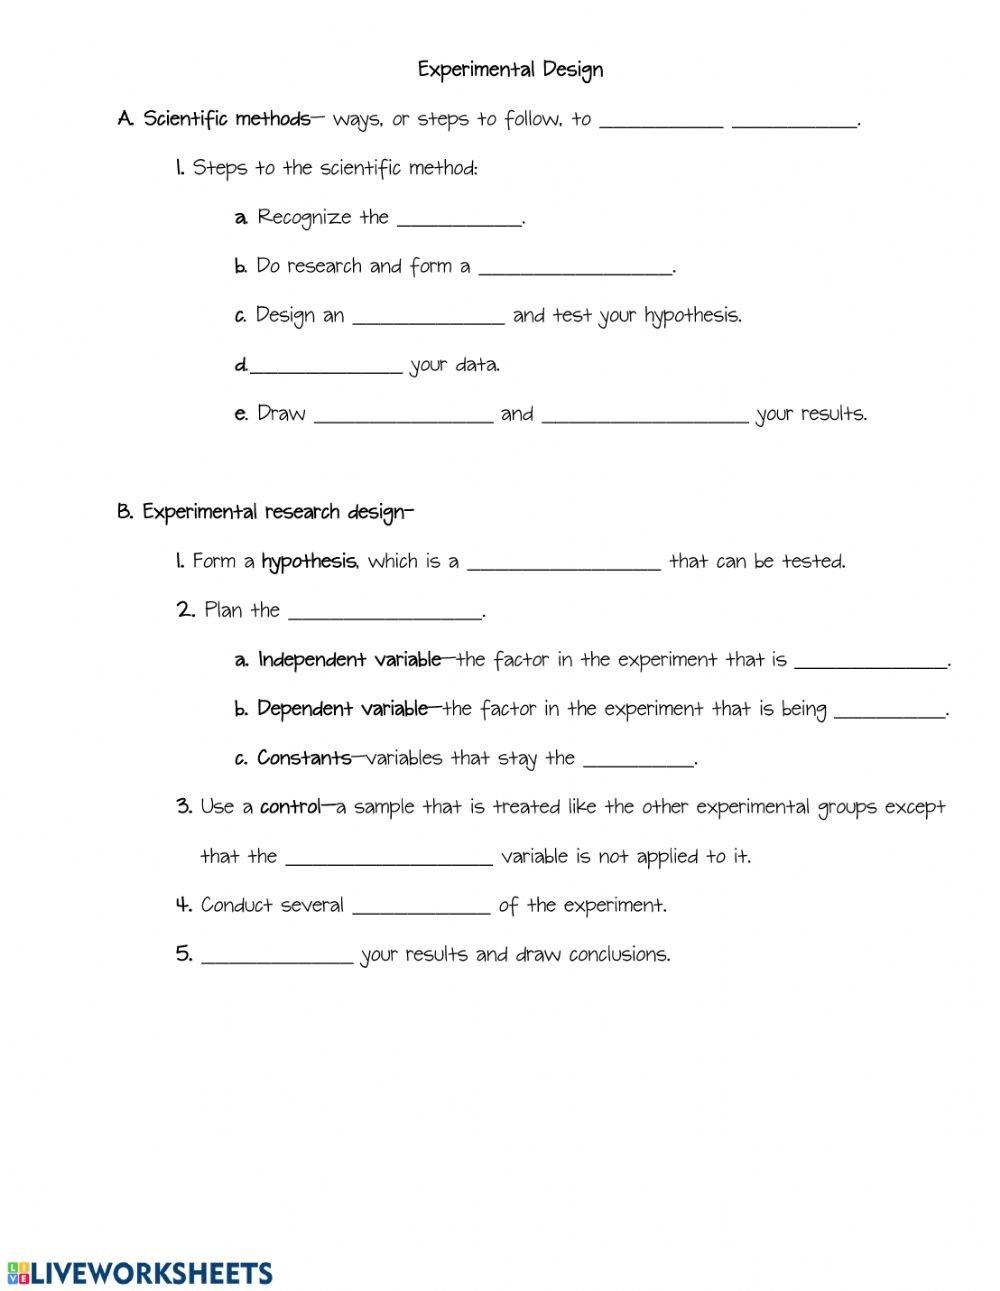 Experimental Design Guided Notes  Interactive Worksheet Regarding Experimental Design Worksheet Scientific Method